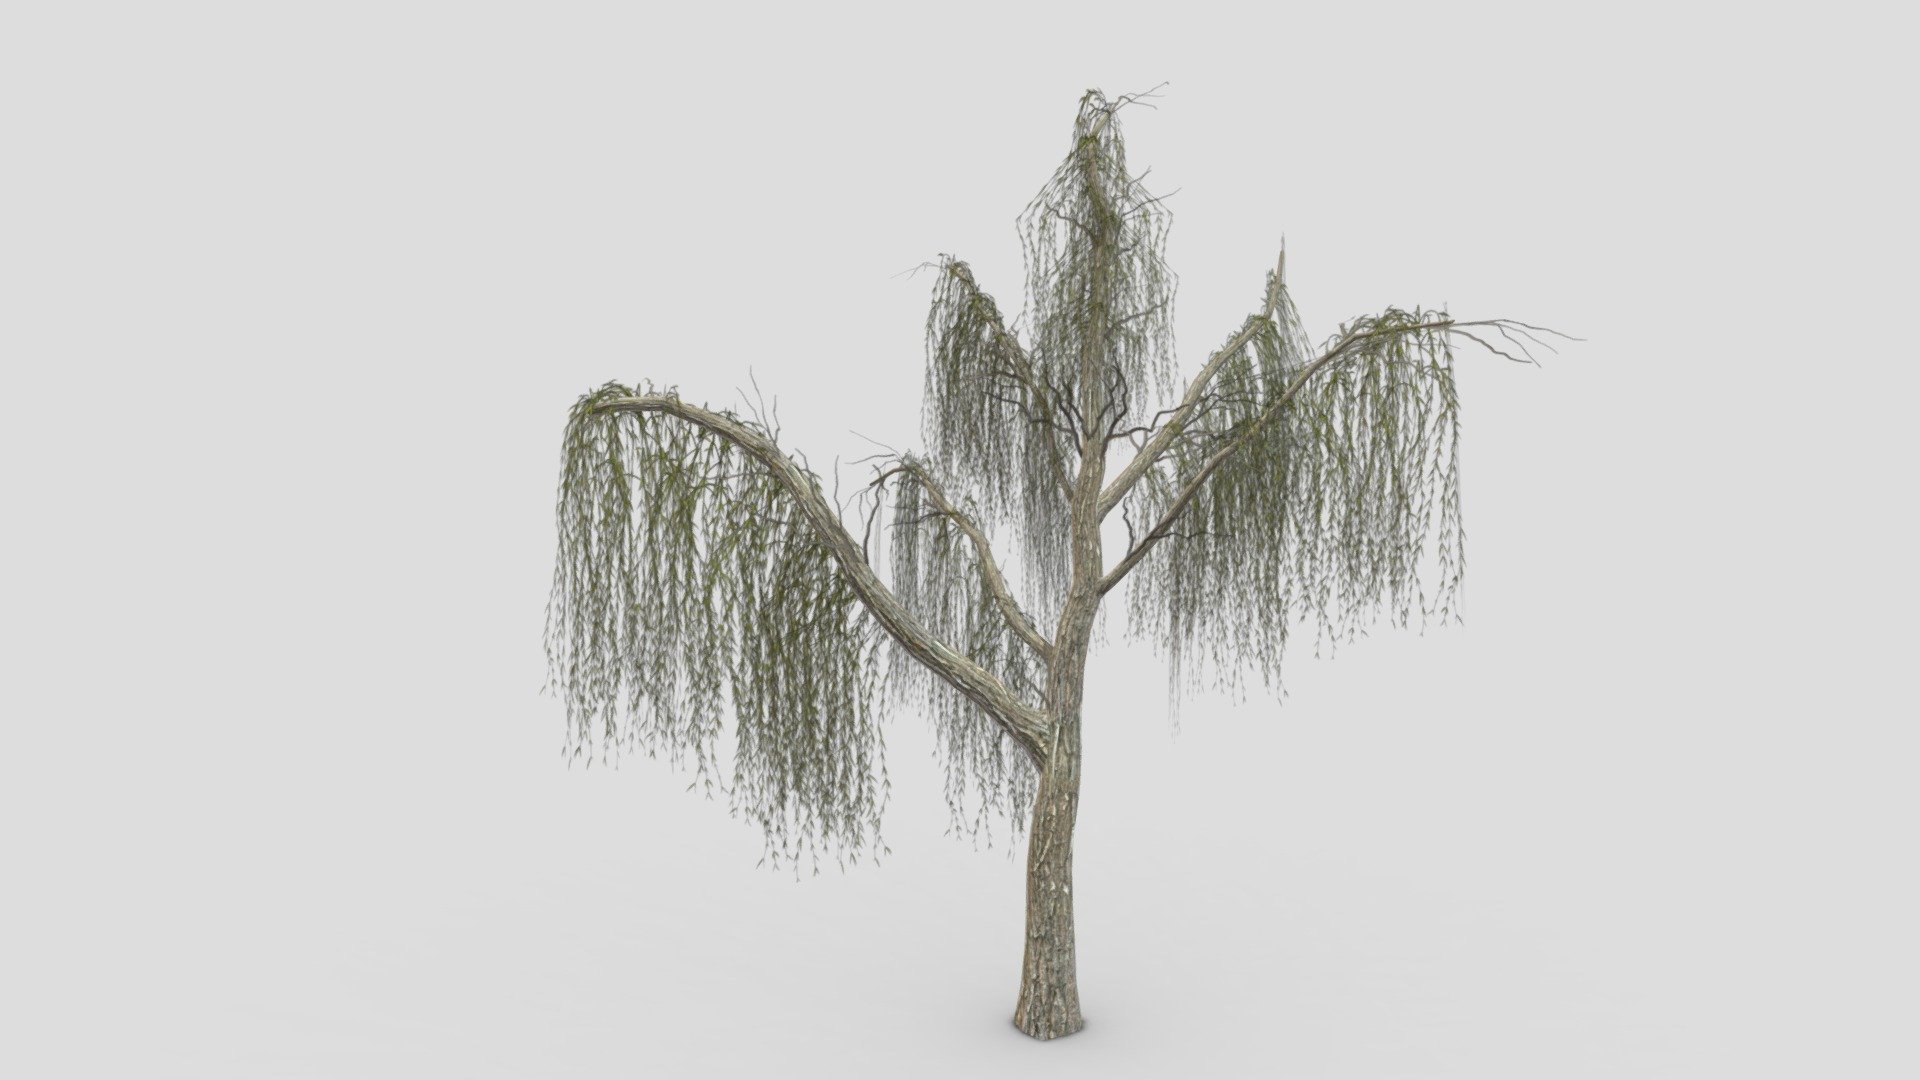 15,845 Weeping Willow Tree Images, Stock Photos, 3D objects